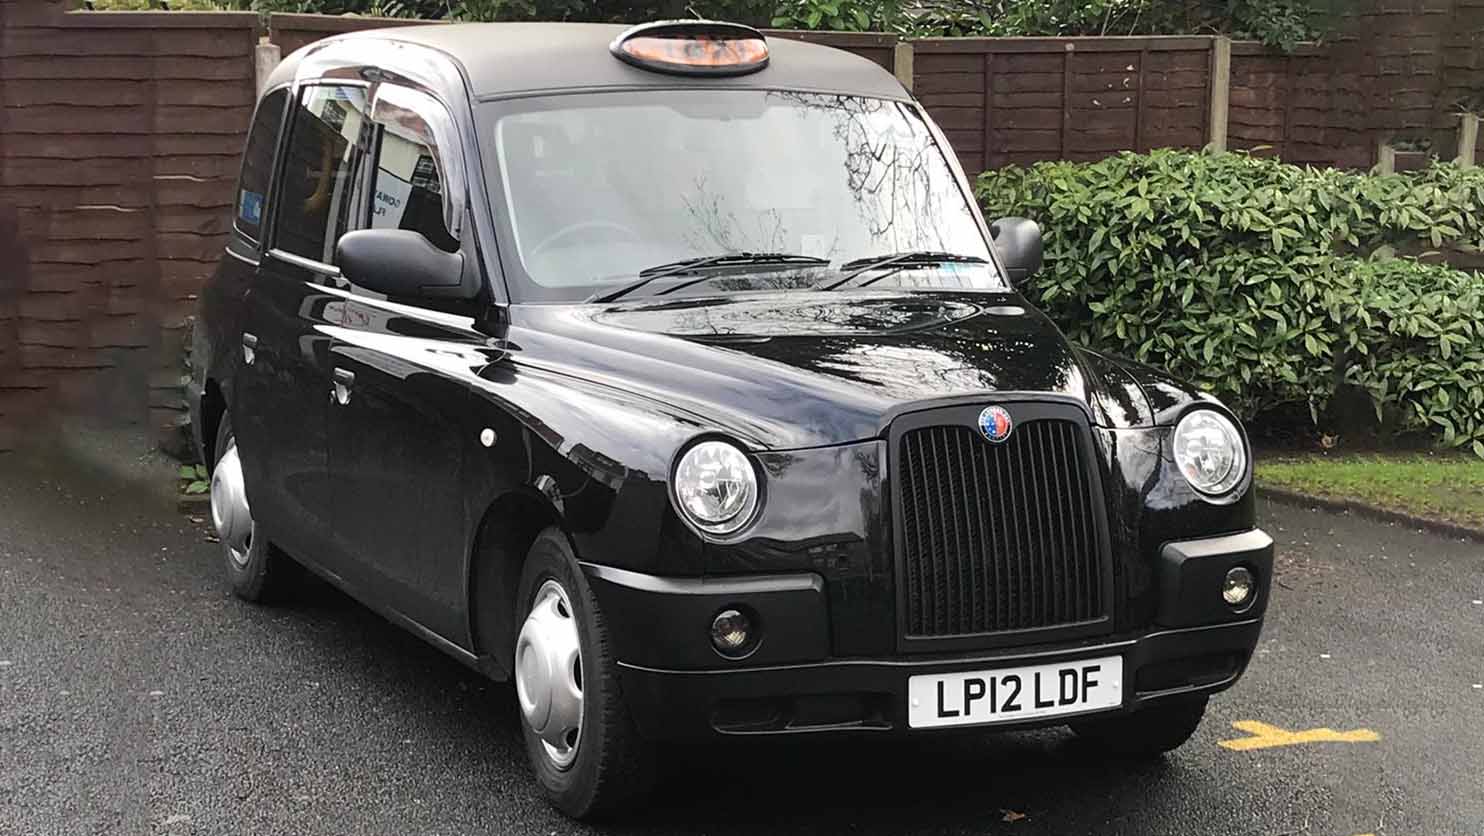 Taxi Cab wedding car for hire in East London